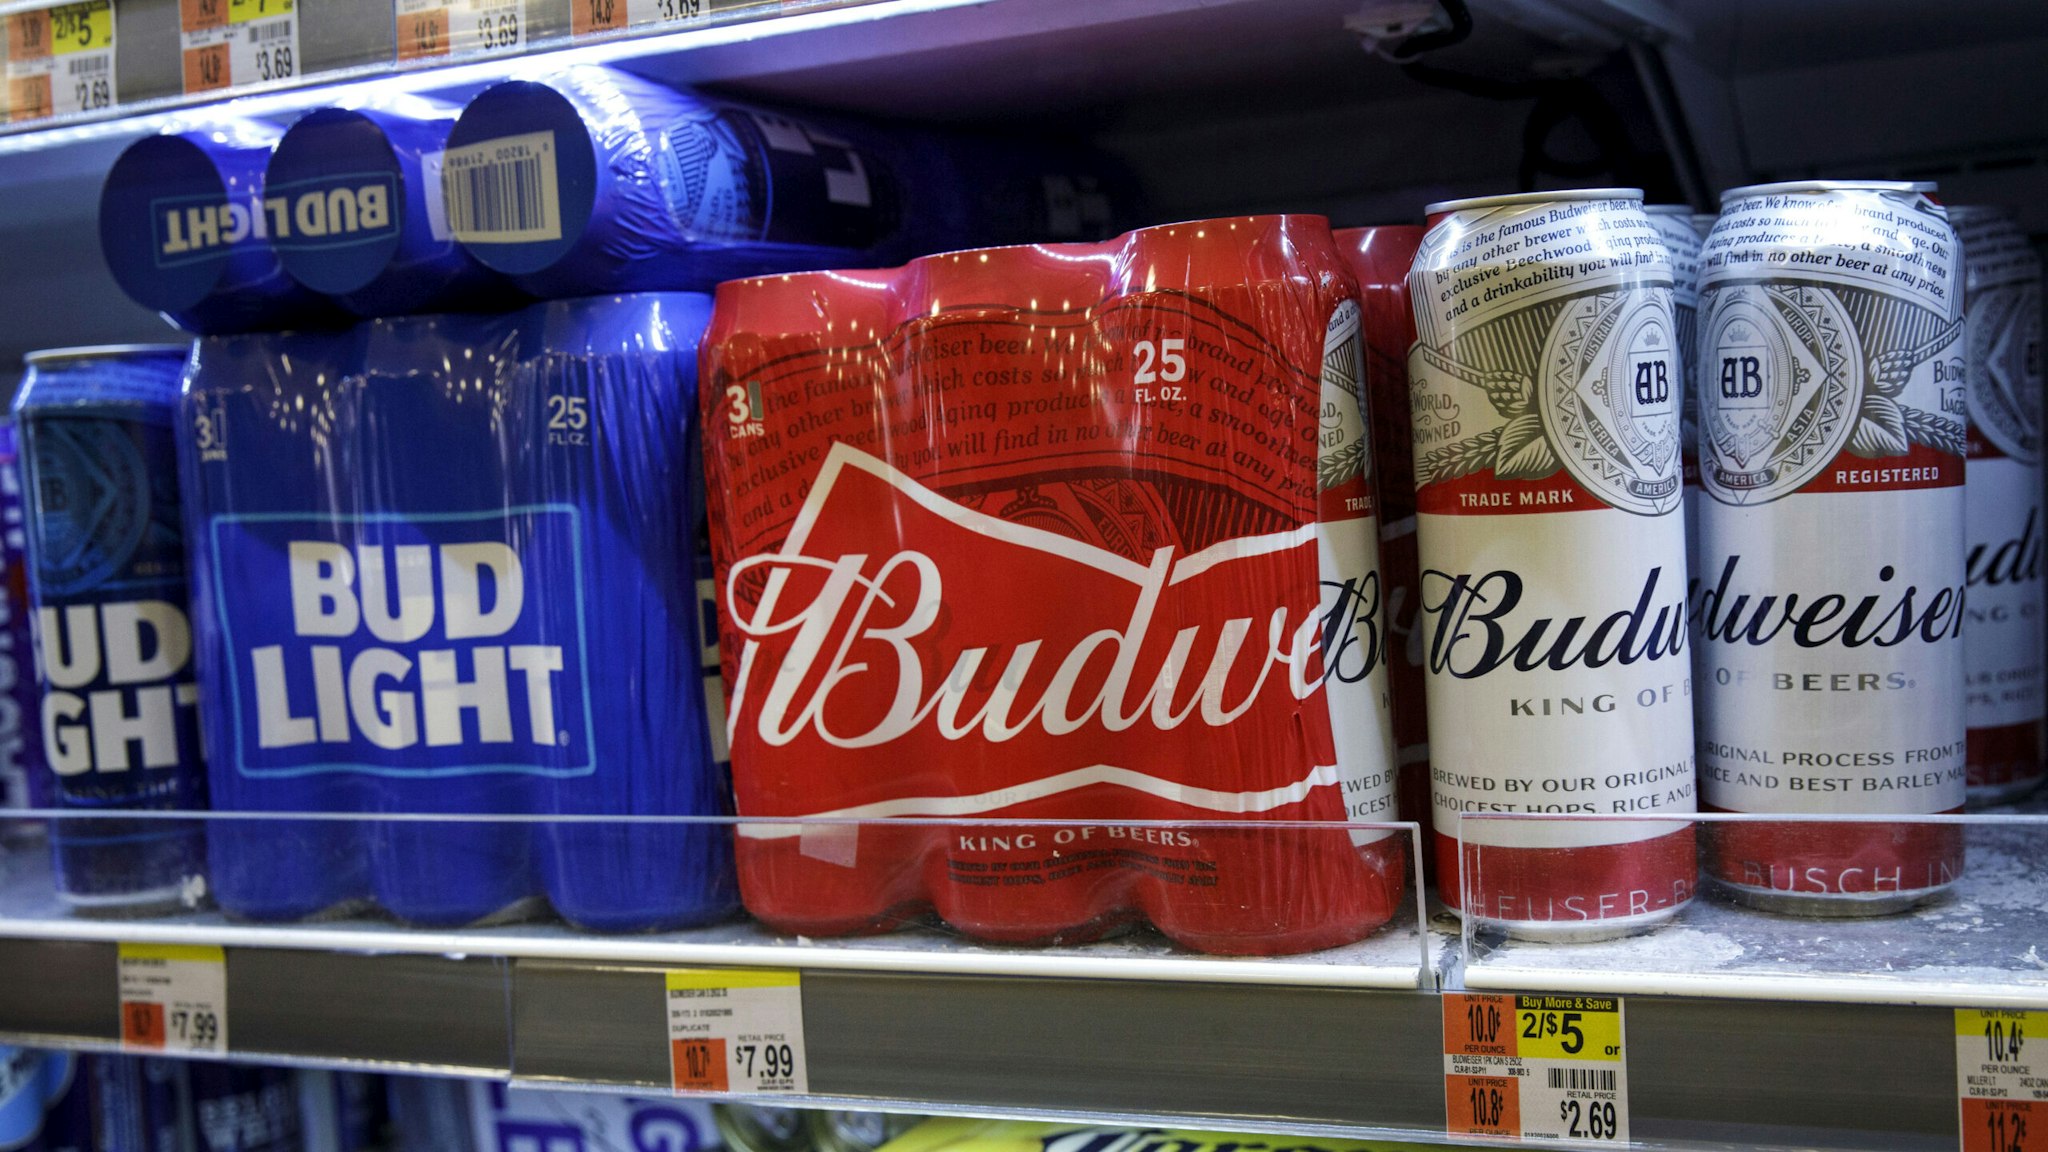 ORK, NY - JULY 26: Cans of Budweiser and Bud Light sit on a shelf for sale at a convenience store, July 26, 2018 in New York City. Anheuser-Busch InBev, the brewer behind Budweiser and Bud Light, said on Thursday that U.S. revenues fell 3.1% in the second quarter. American consumers continue to shift away from domestic lagers and toward crafts beers and wine and spirits.